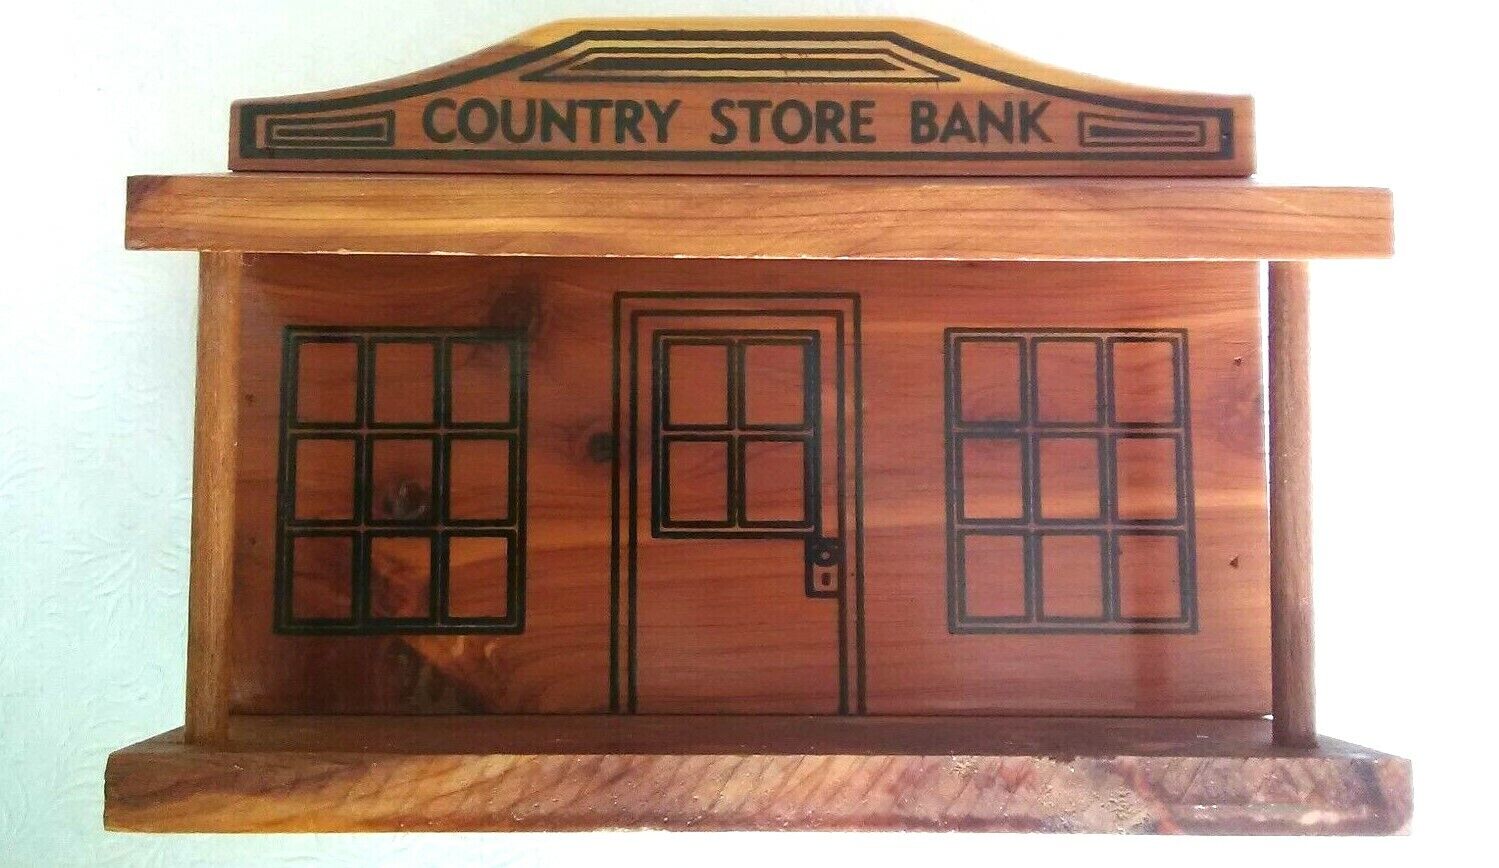 Lot of Two Vintage Banks - Country Store and Lincoln Log Cabin Без бренда - фотография #8